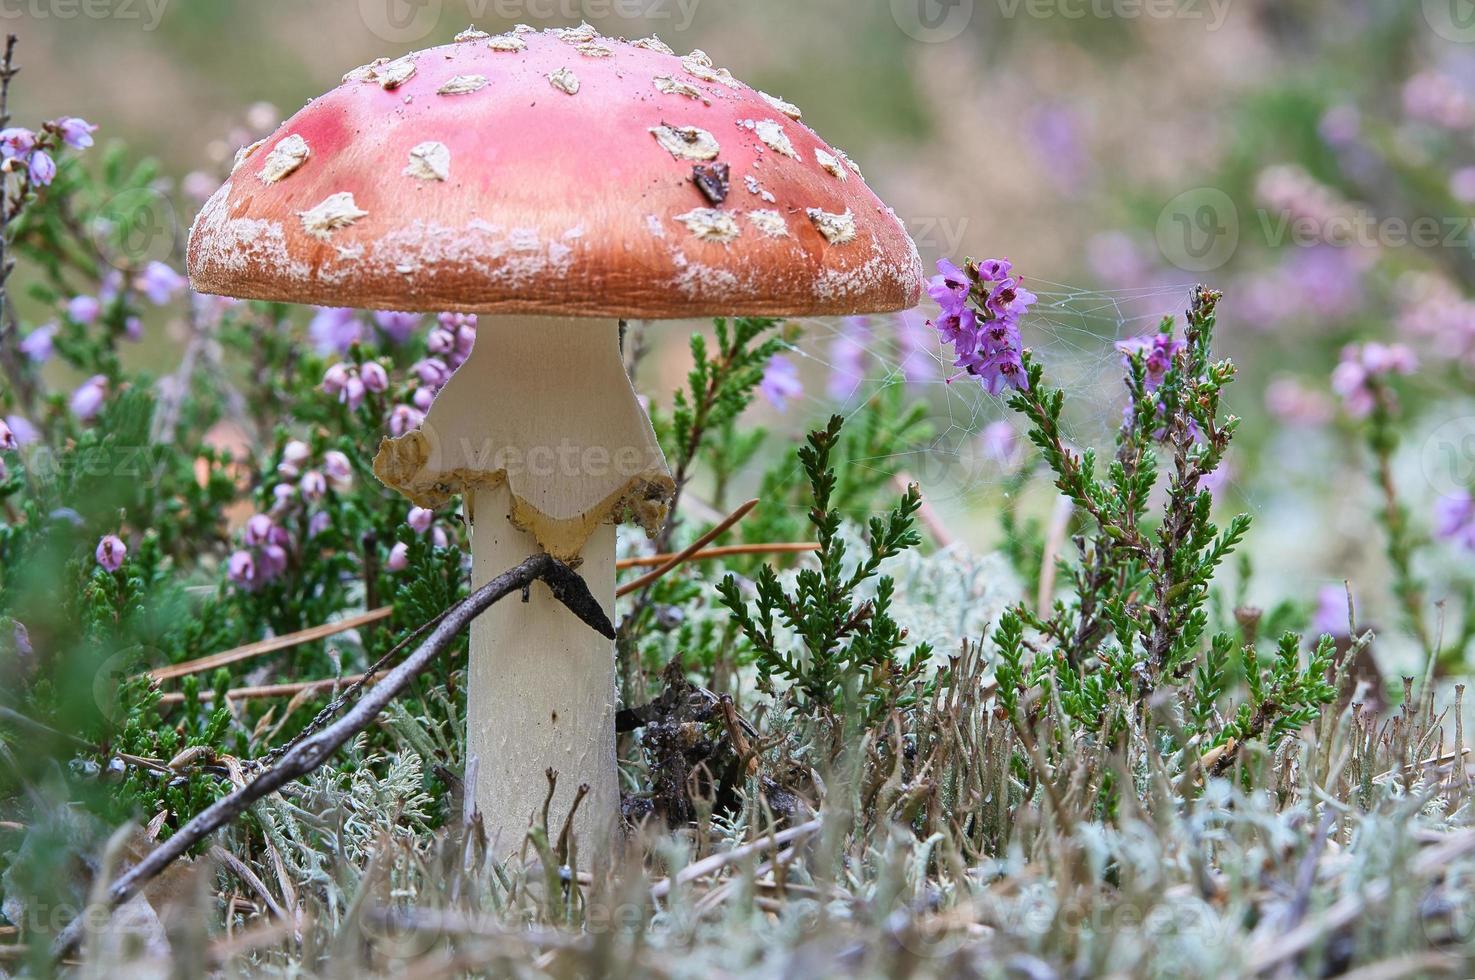 Toadstool in a heather field in the forest. Poisonous mushroom. Red cap, white spot photo